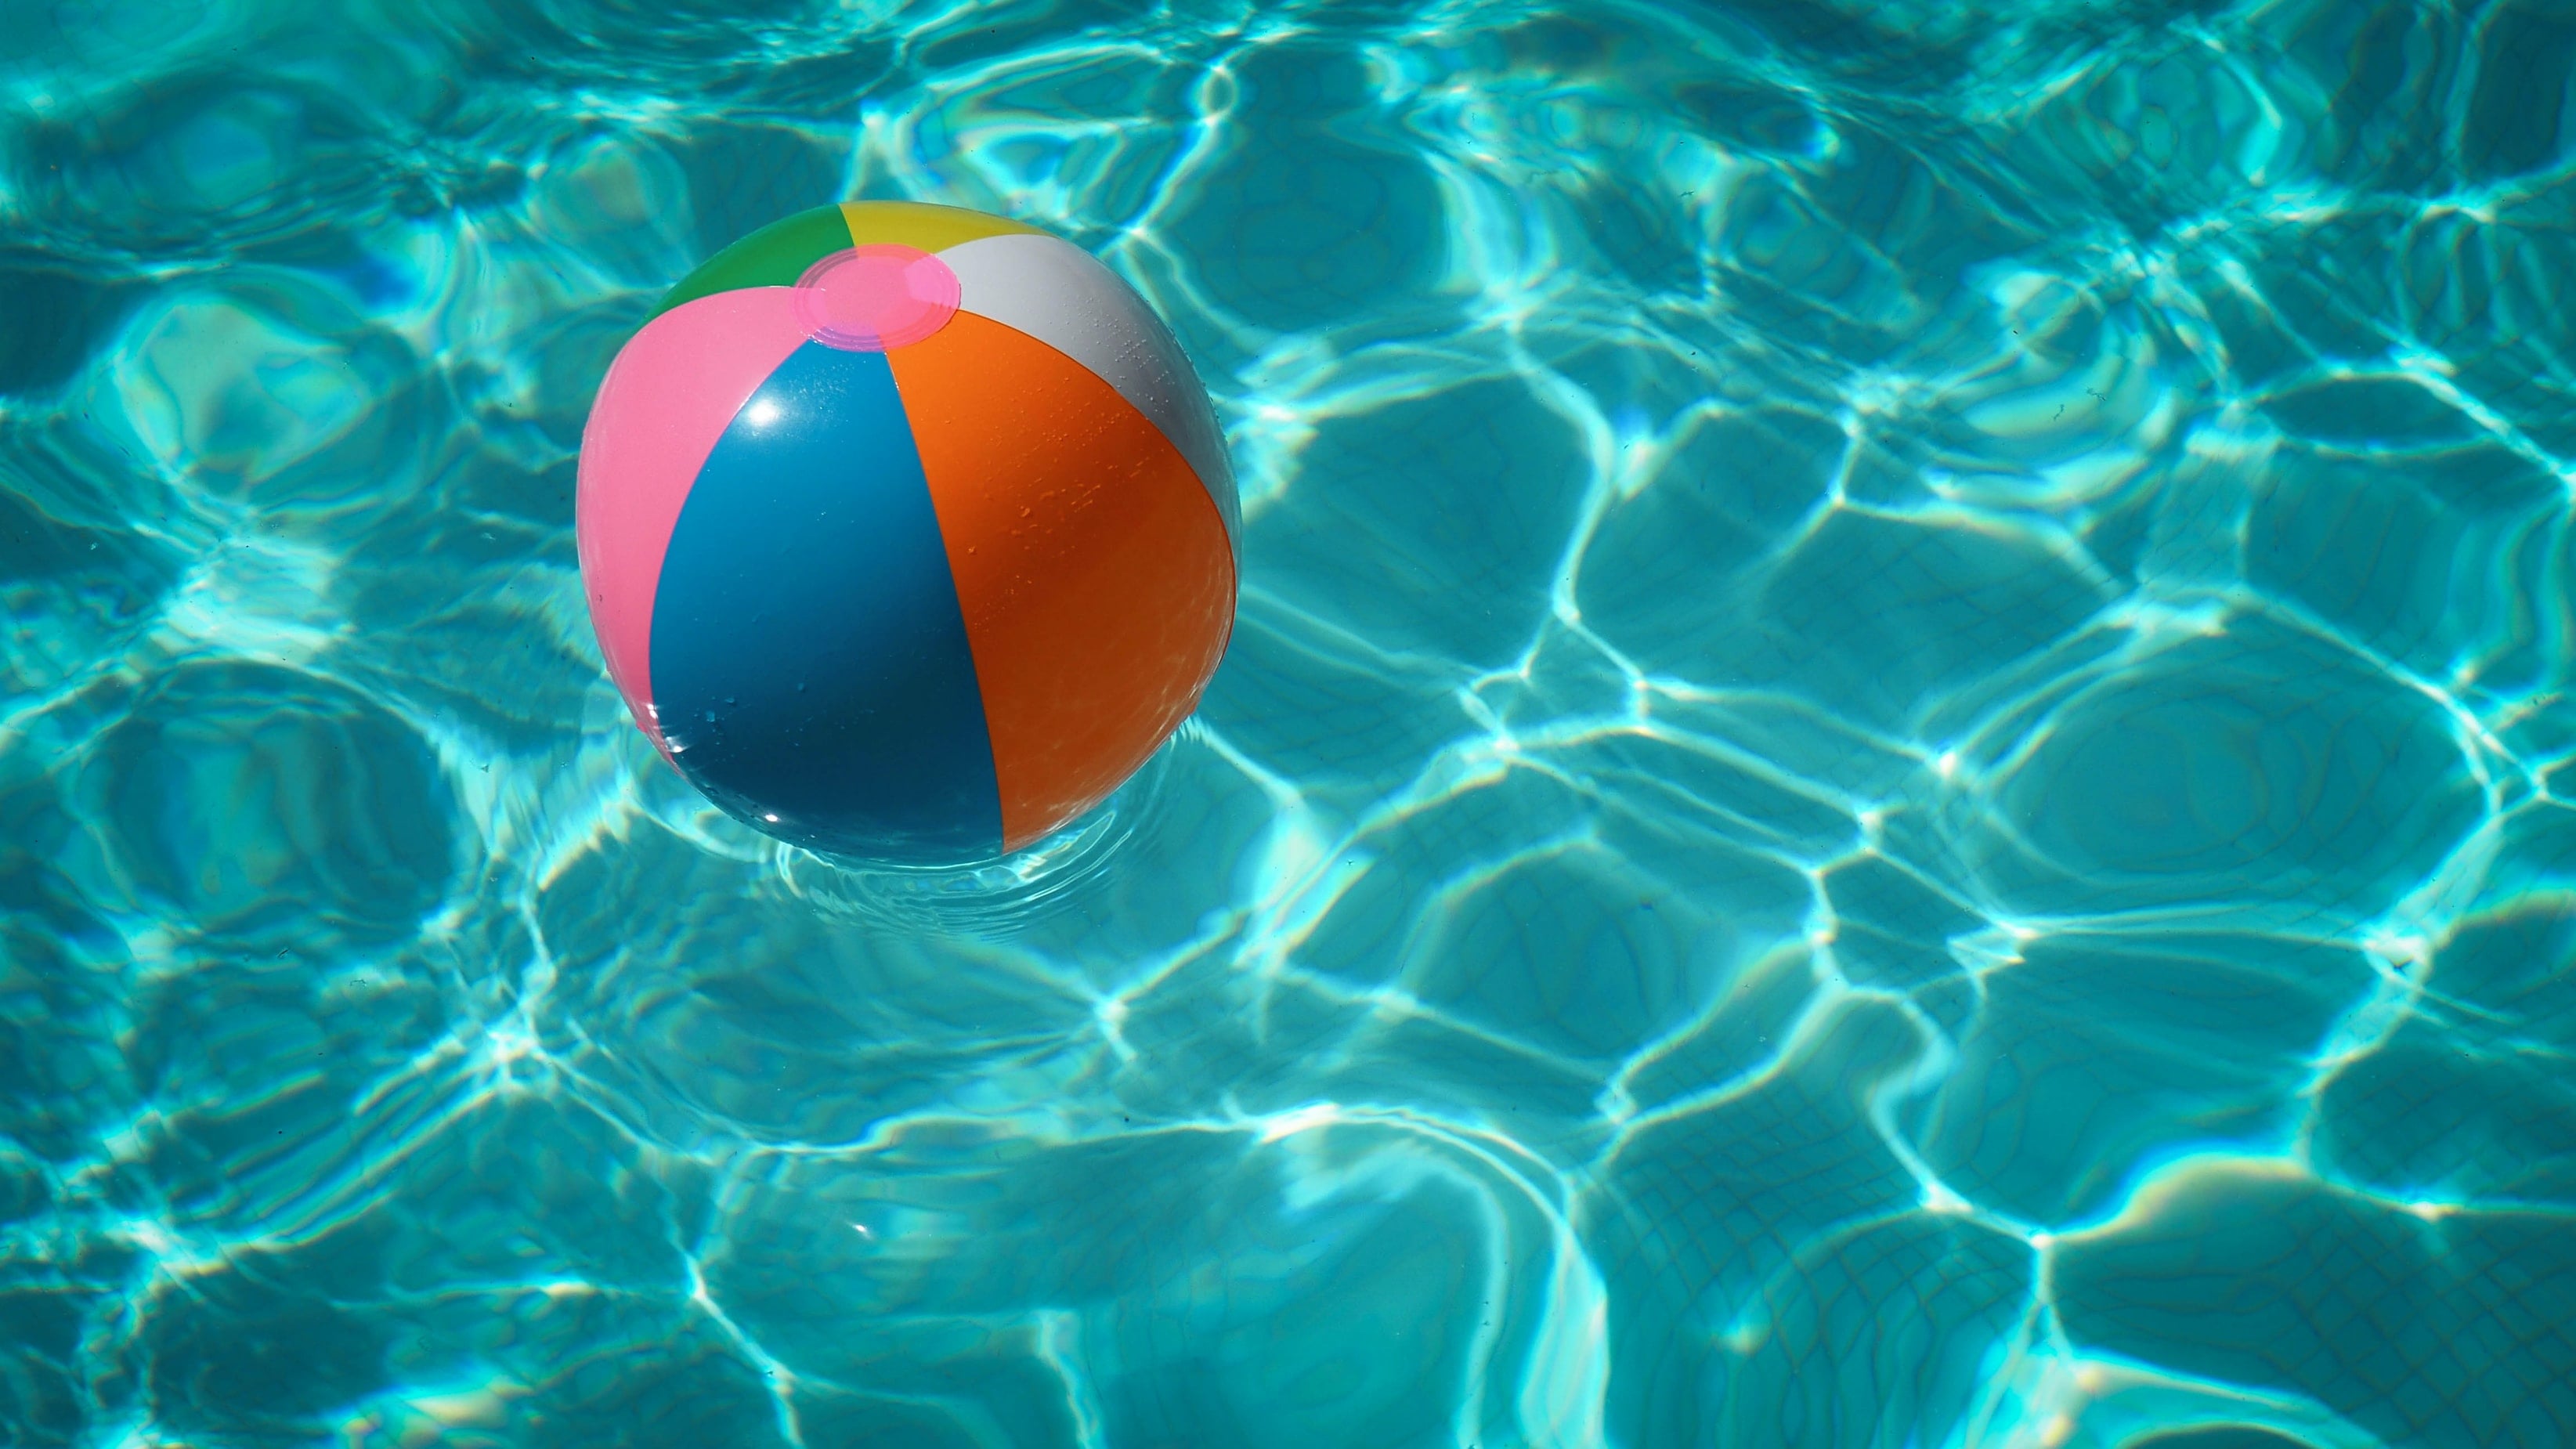 Beach Ball on the Water